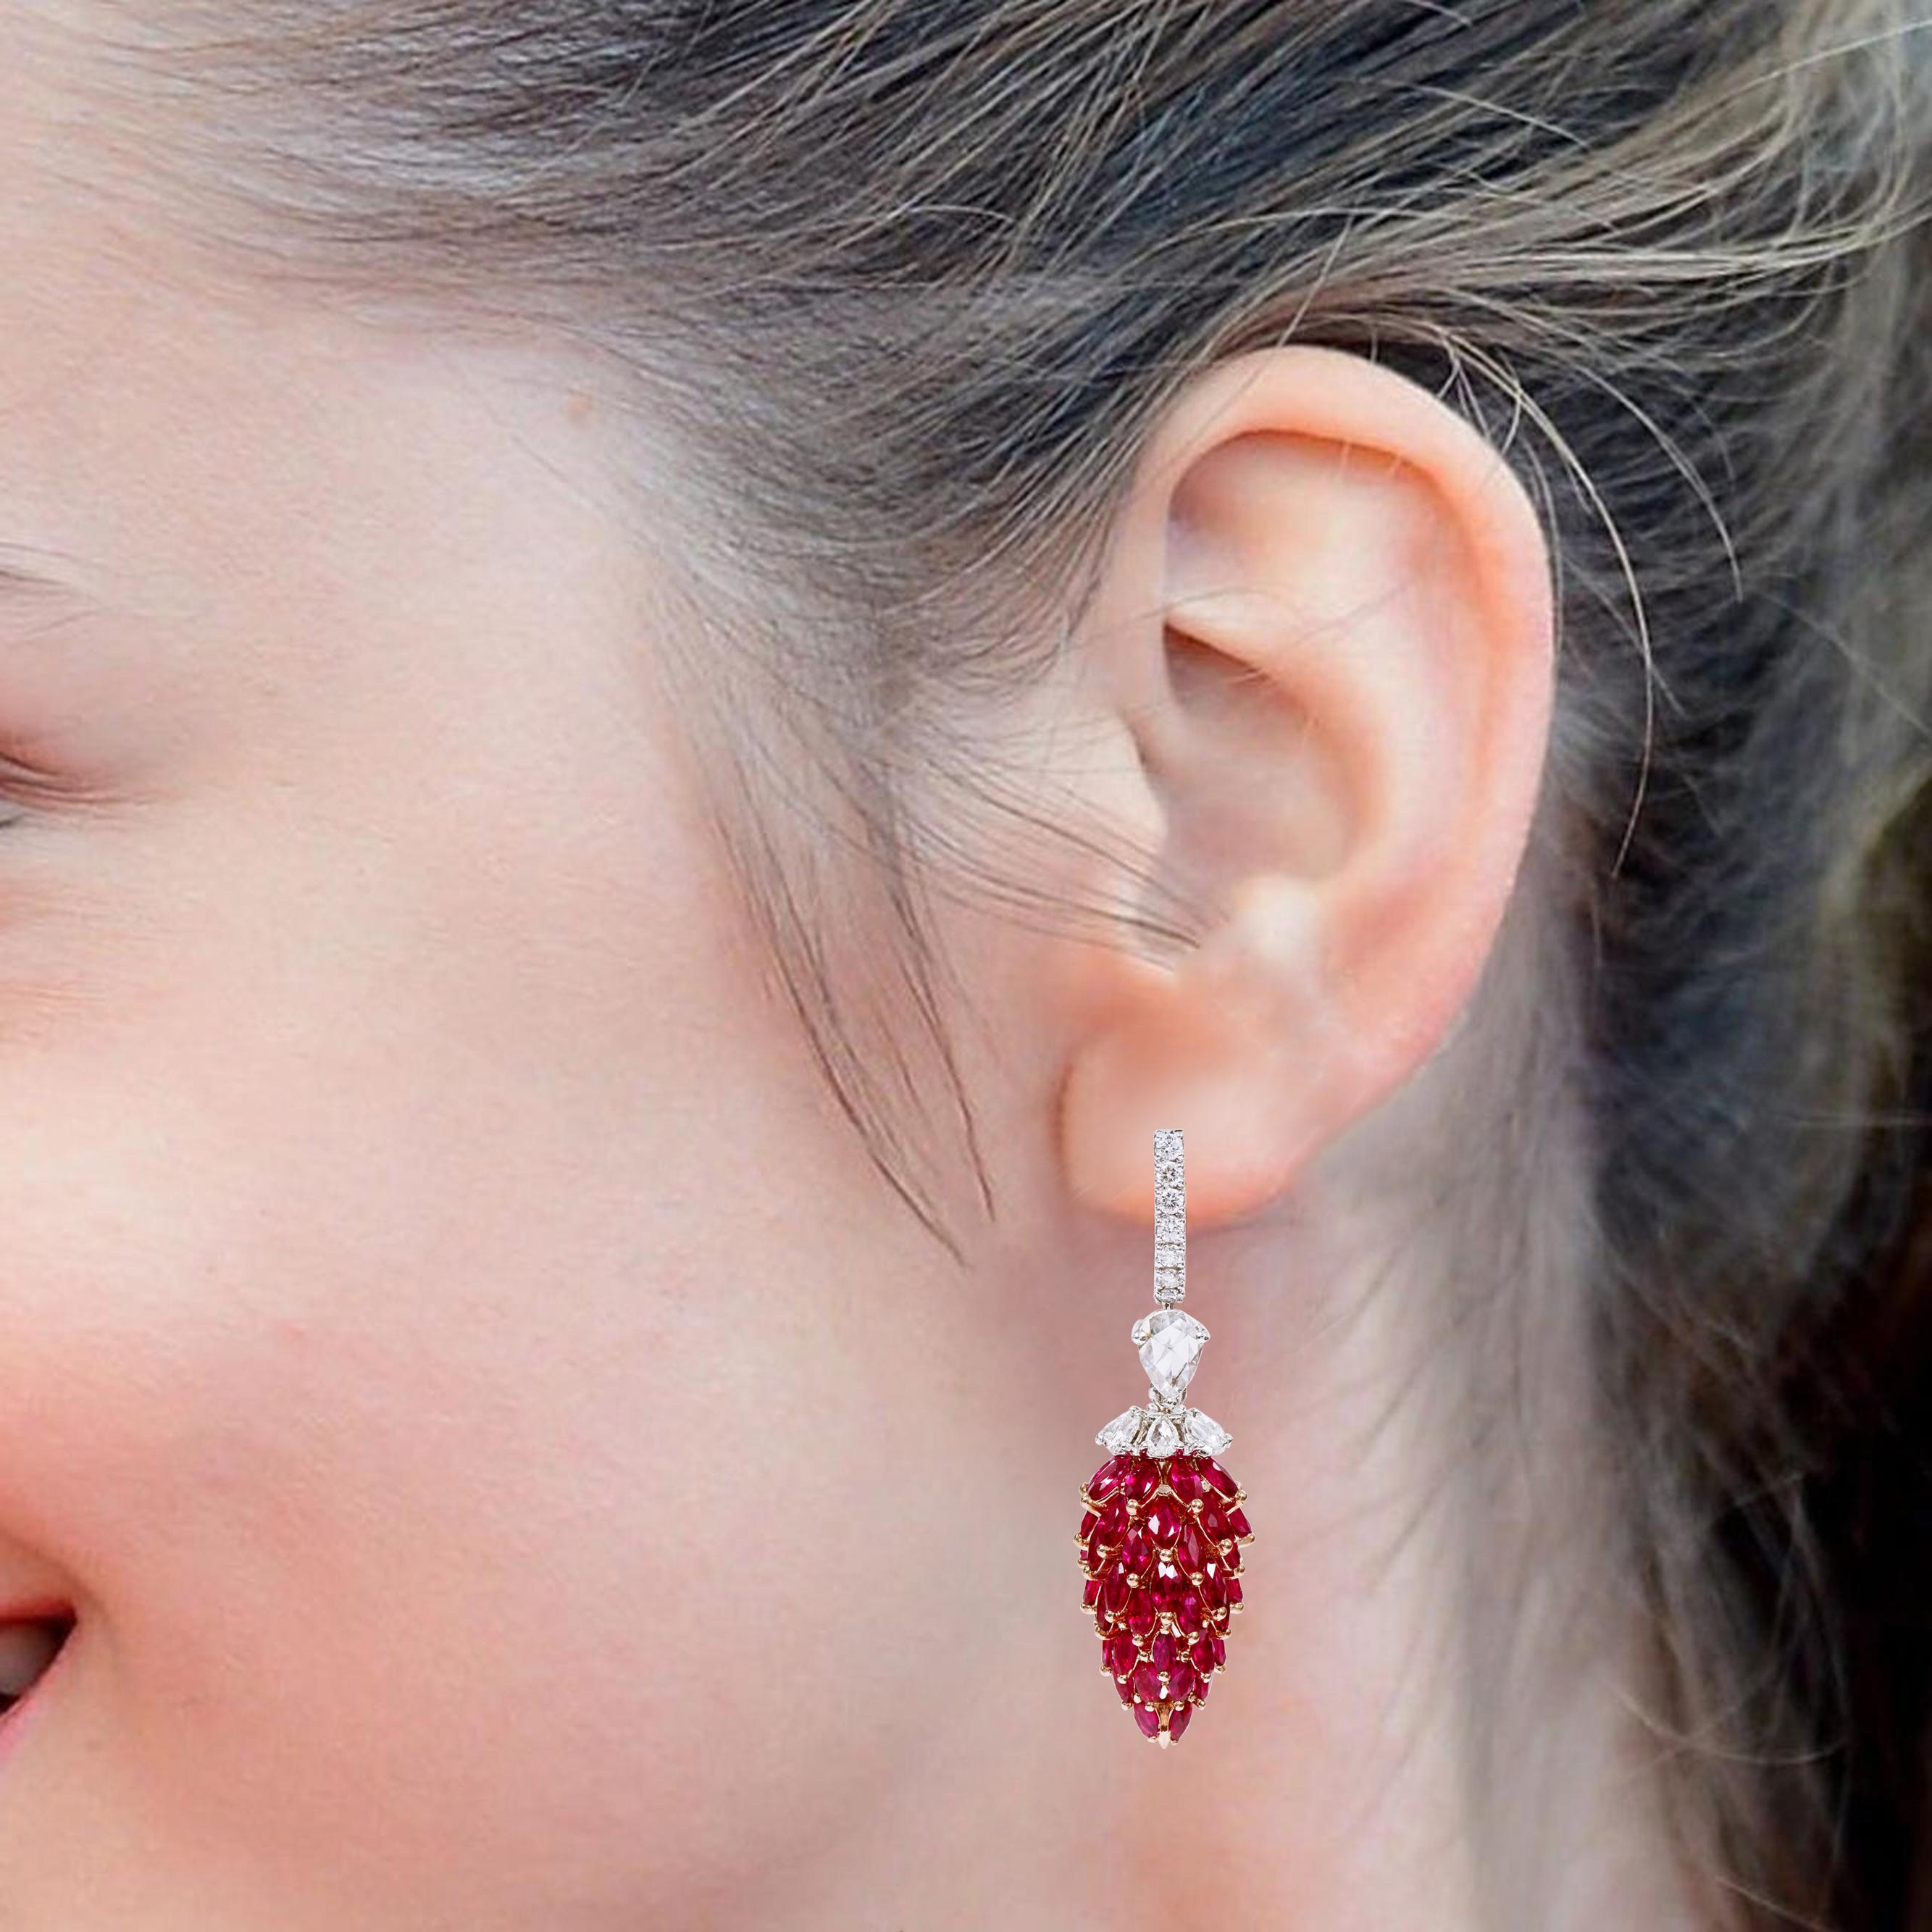 18 Karat Gold 16.77 Carat Pigeon-Blood Ruby and Diamond Drop Earrings

Introducing a pinnacle of opulence and rarity - our 18 Karat Gold 16.77 Carat Pigeon-Blood Ruby and Pear-Cut Diamond Drop Earrings. These earrings are a breathtaking embodiment